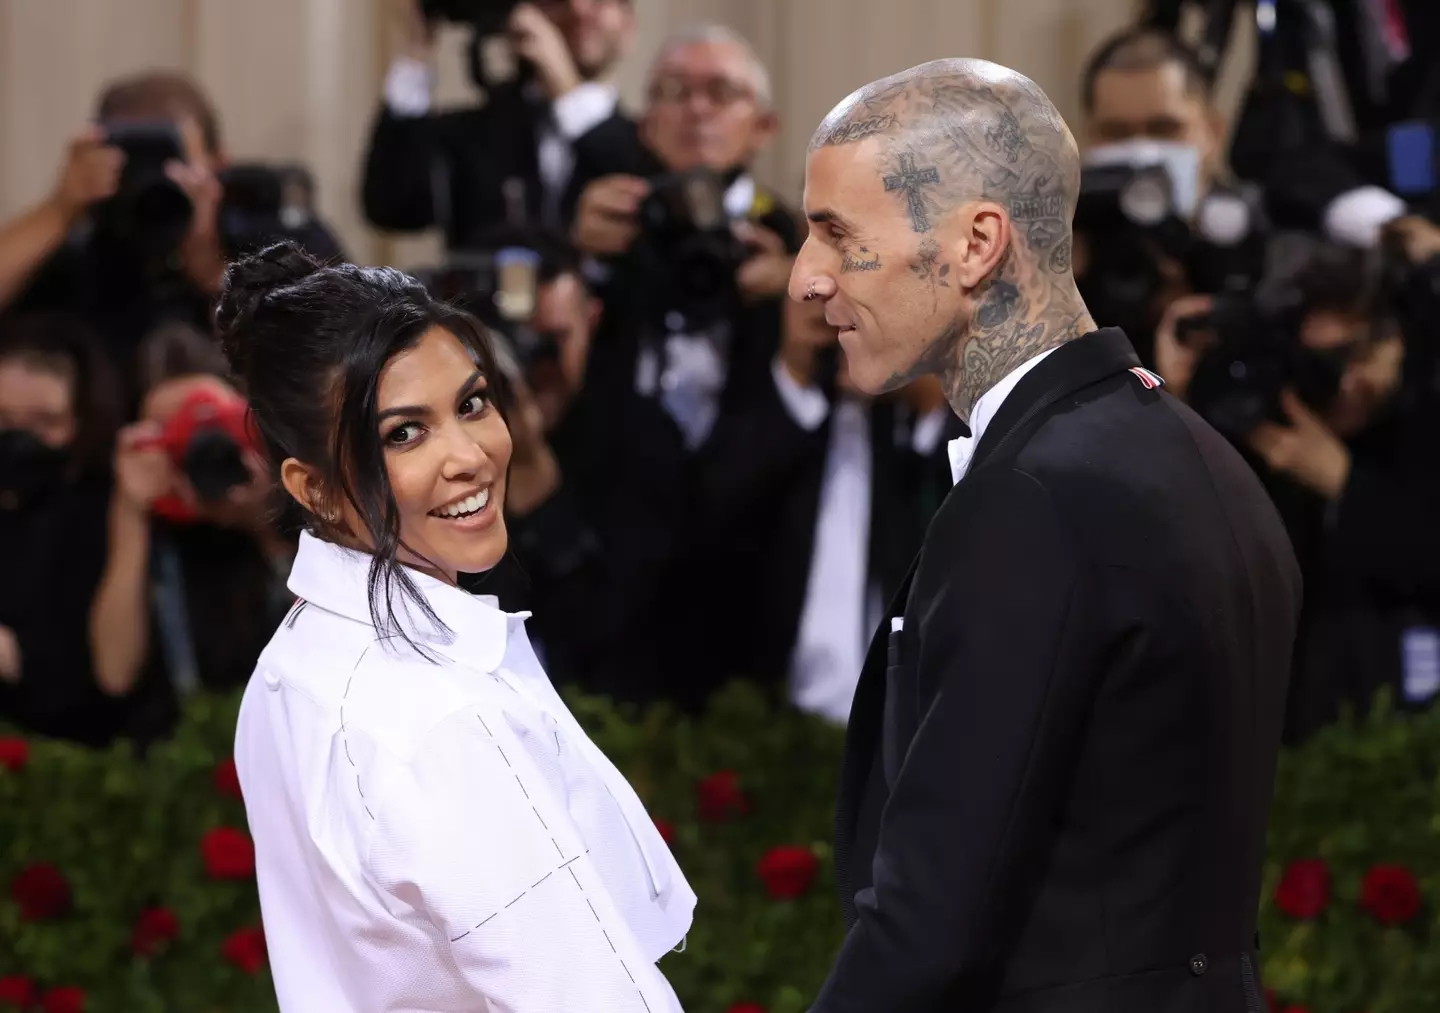 Travis Barker fans are speaking out against the musician being labelled as 'Kourtney Kardashian's husband'.